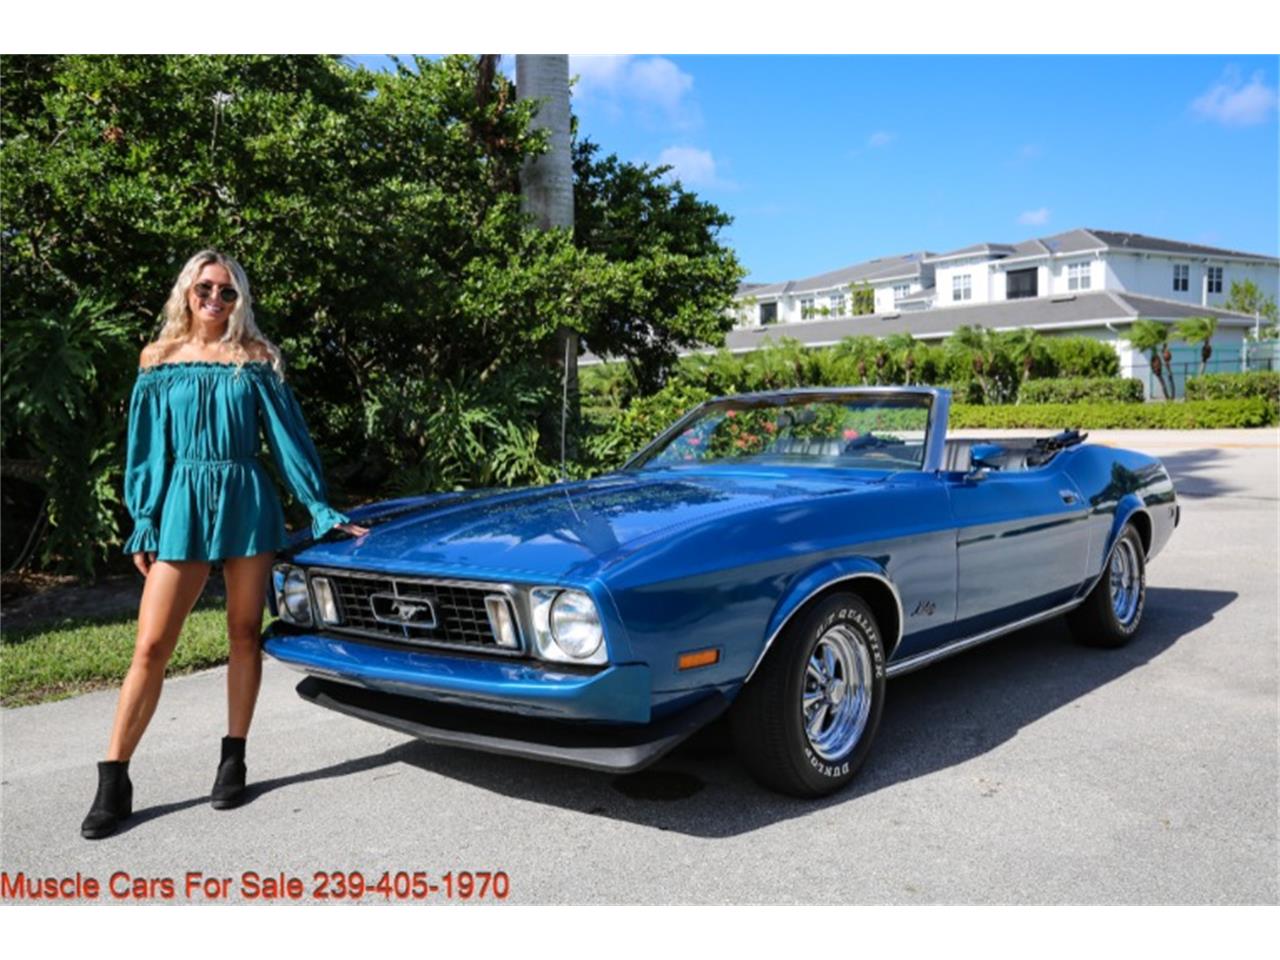 For Sale: 1973 Ford Mustang in Fort Myers, Florida for sale in Fort Myers, FL